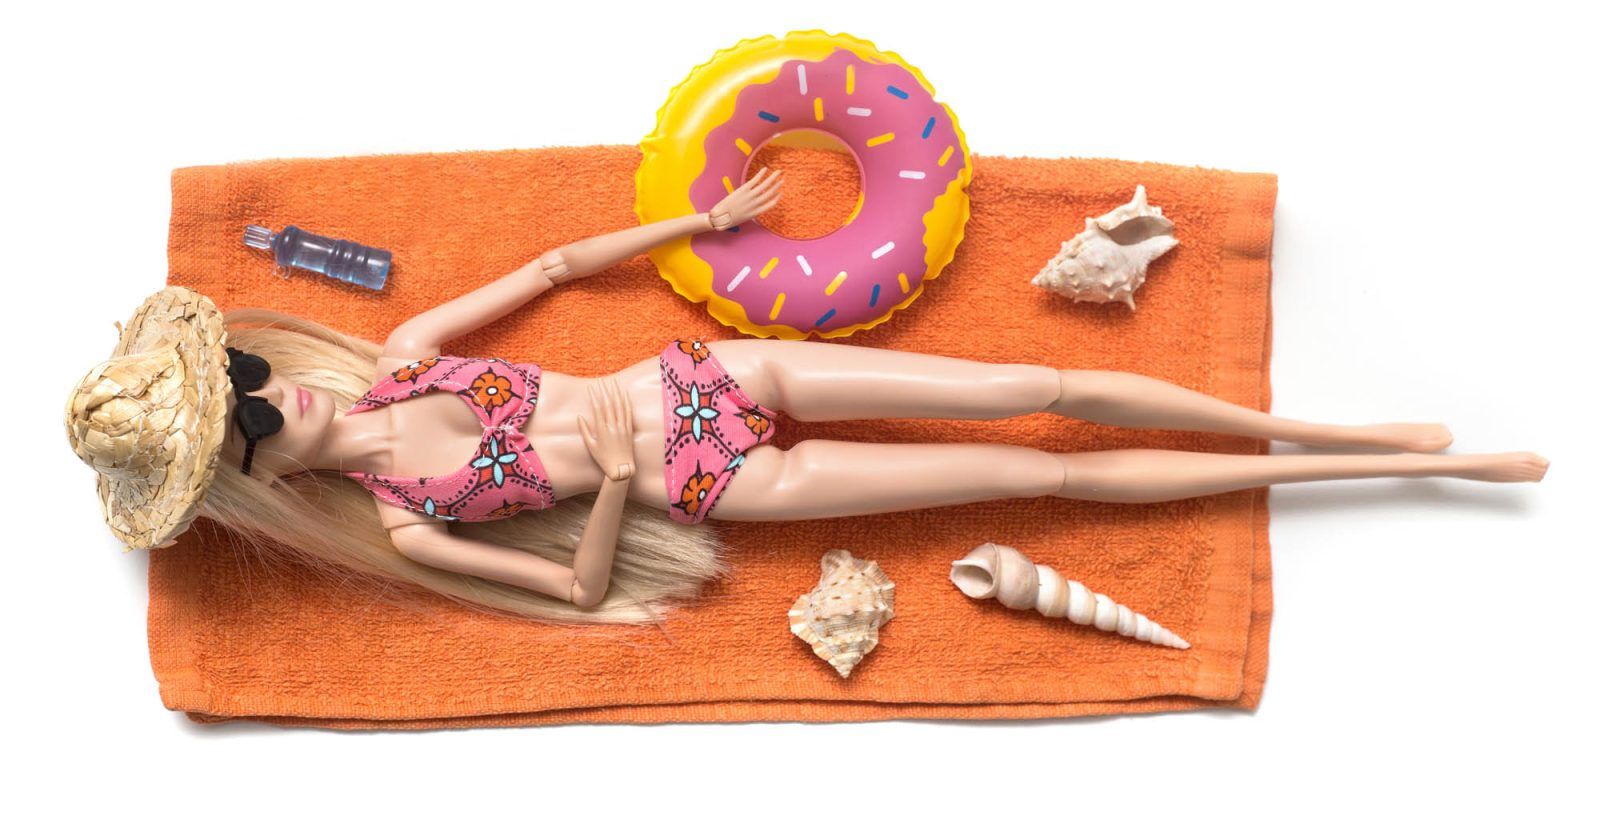 Barbie-mania: Did our Barbie dolls give us unrealistic